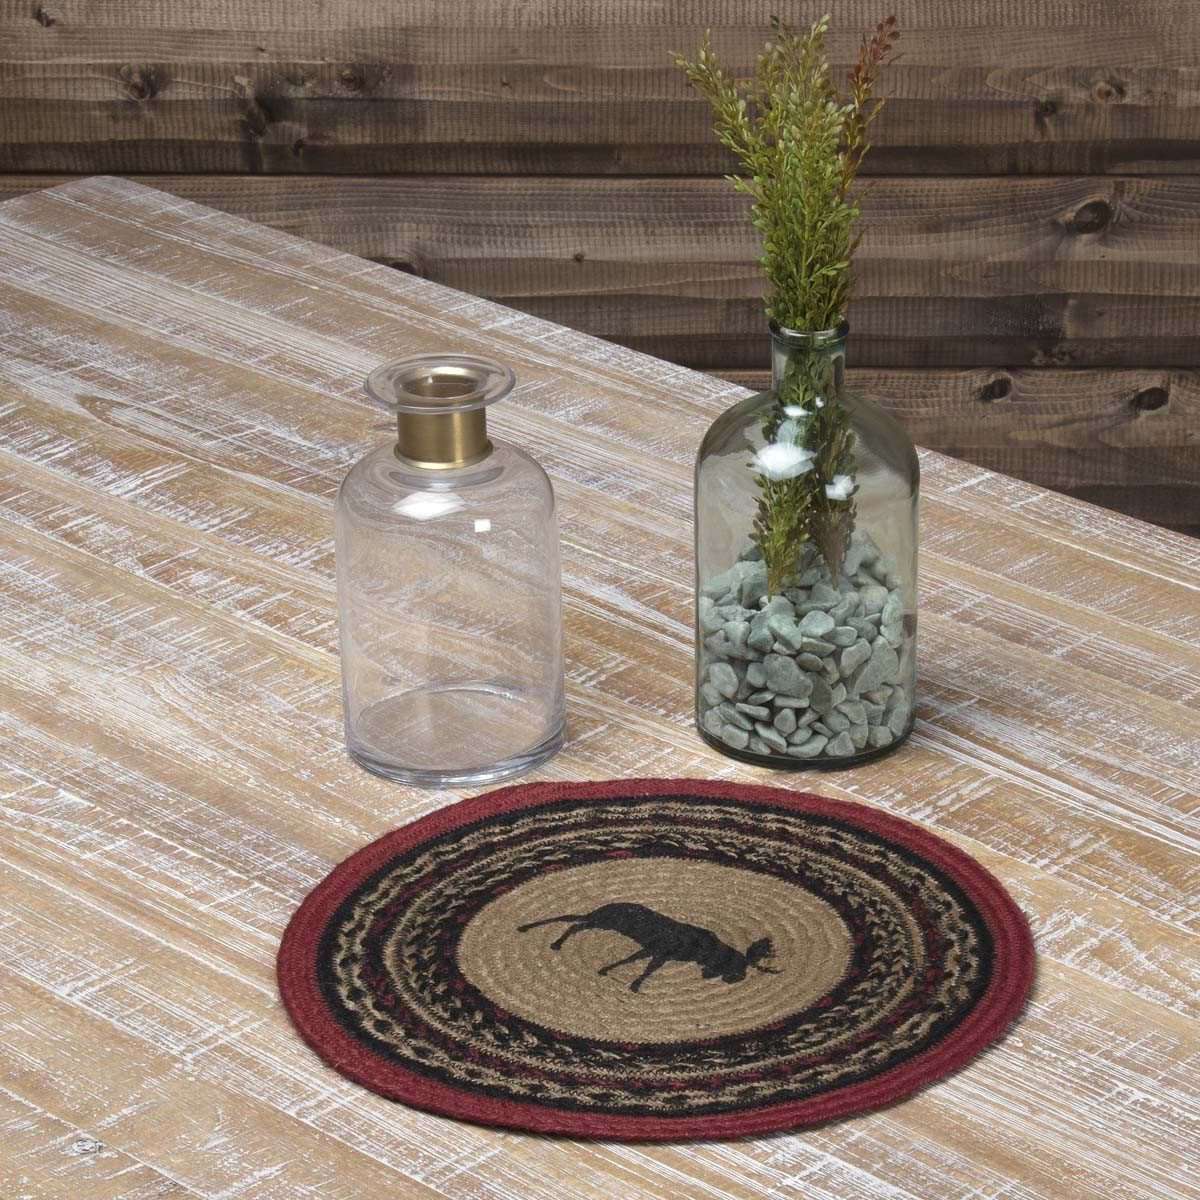 Cumberland Stenciled Moose Jute Braided Placemat Round Set of 6 VHC Brands - The Fox Decor